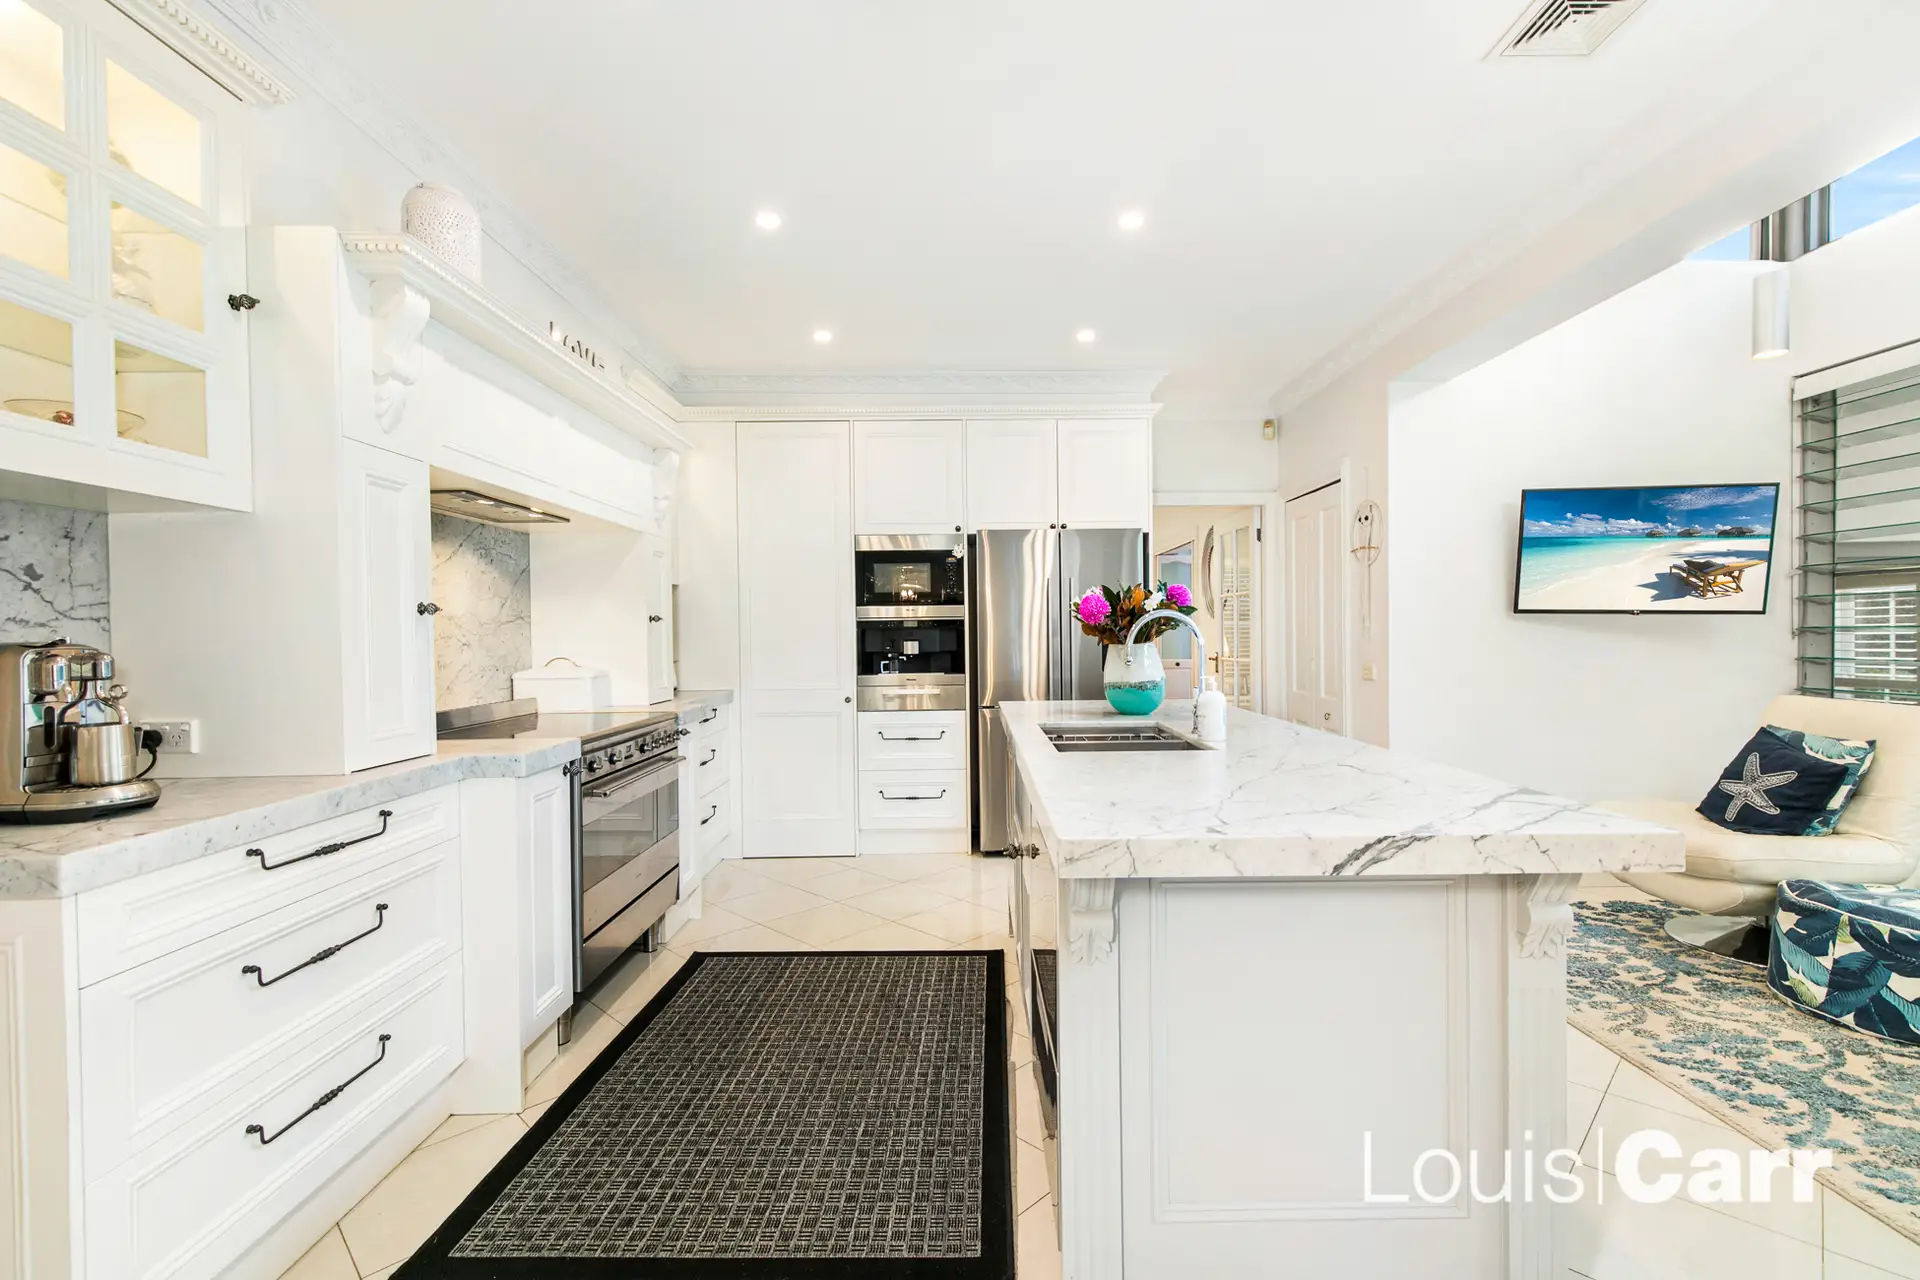 Photo #6: 16 Bellbird Drive, West Pennant Hills - Sold by Louis Carr Real Estate